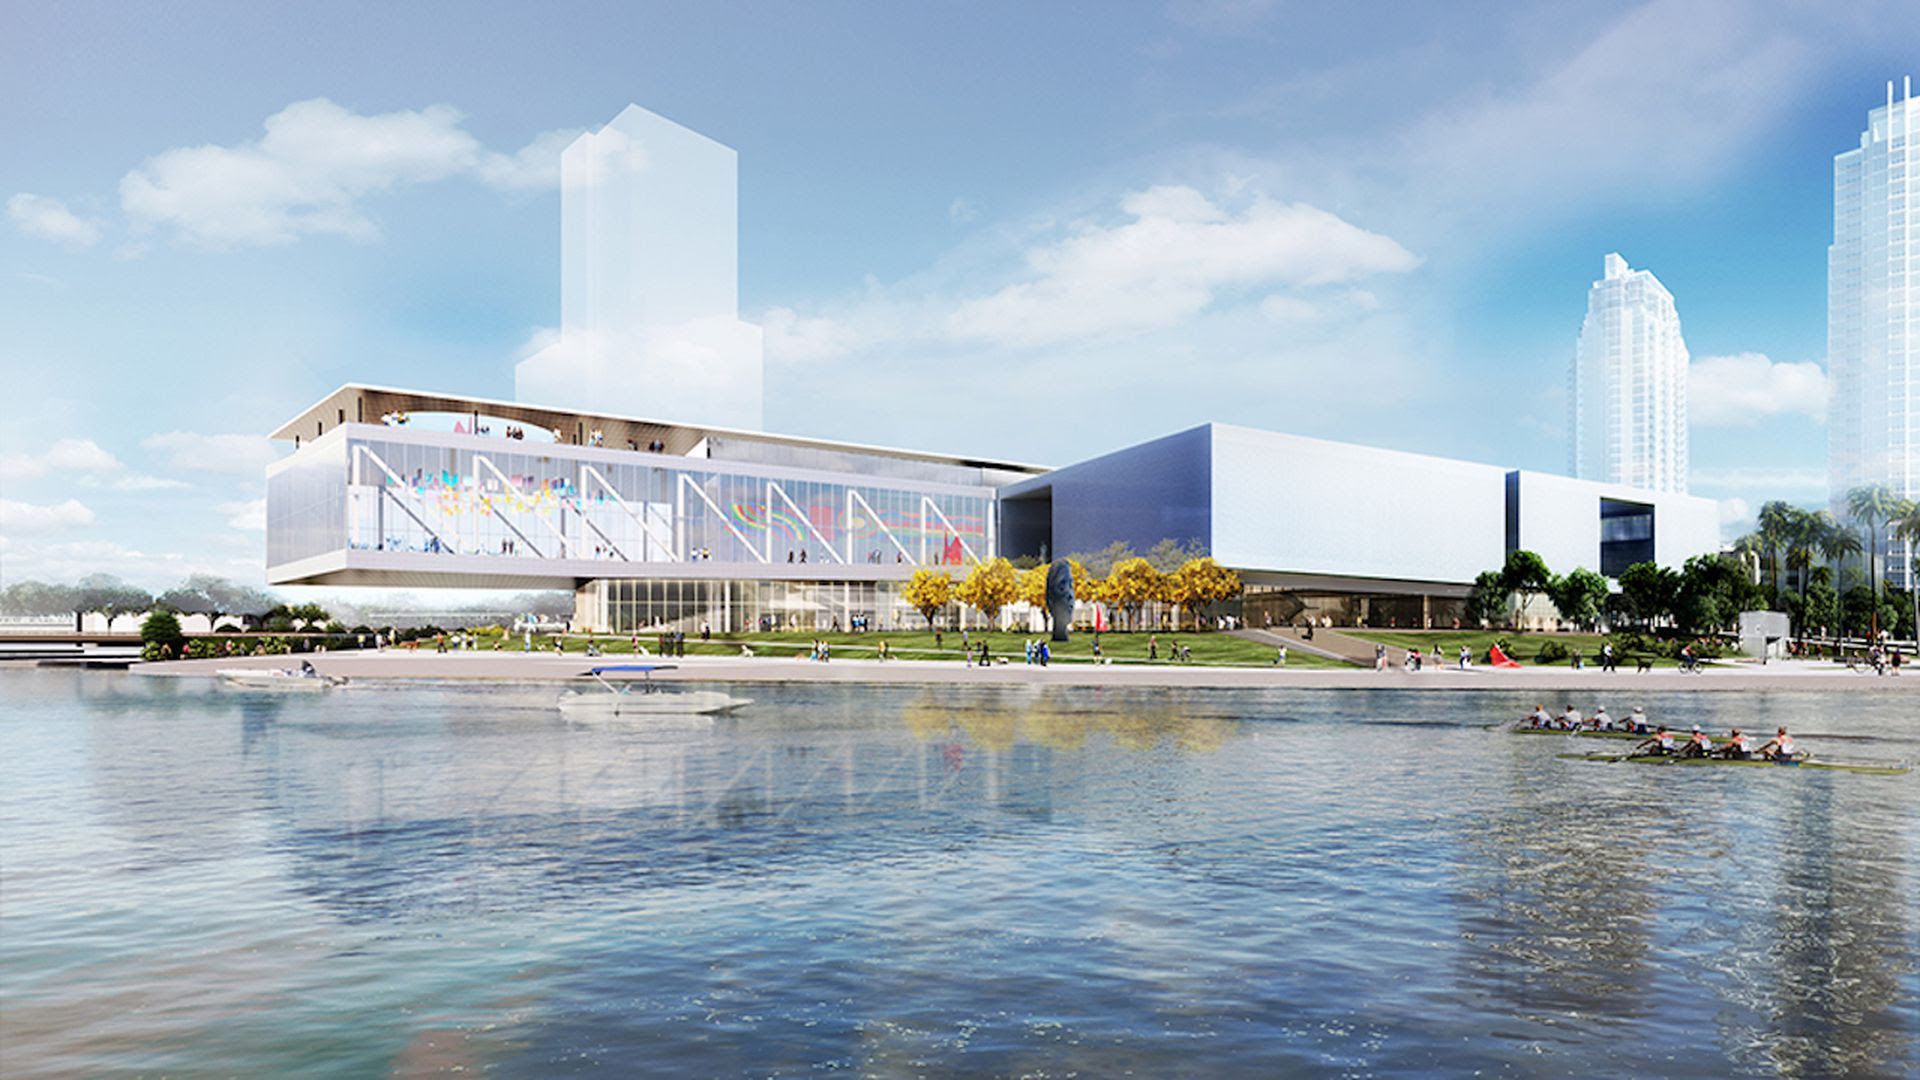 A rendering of the Tampa Museum of Art's new renovation and expansion on the waterfront